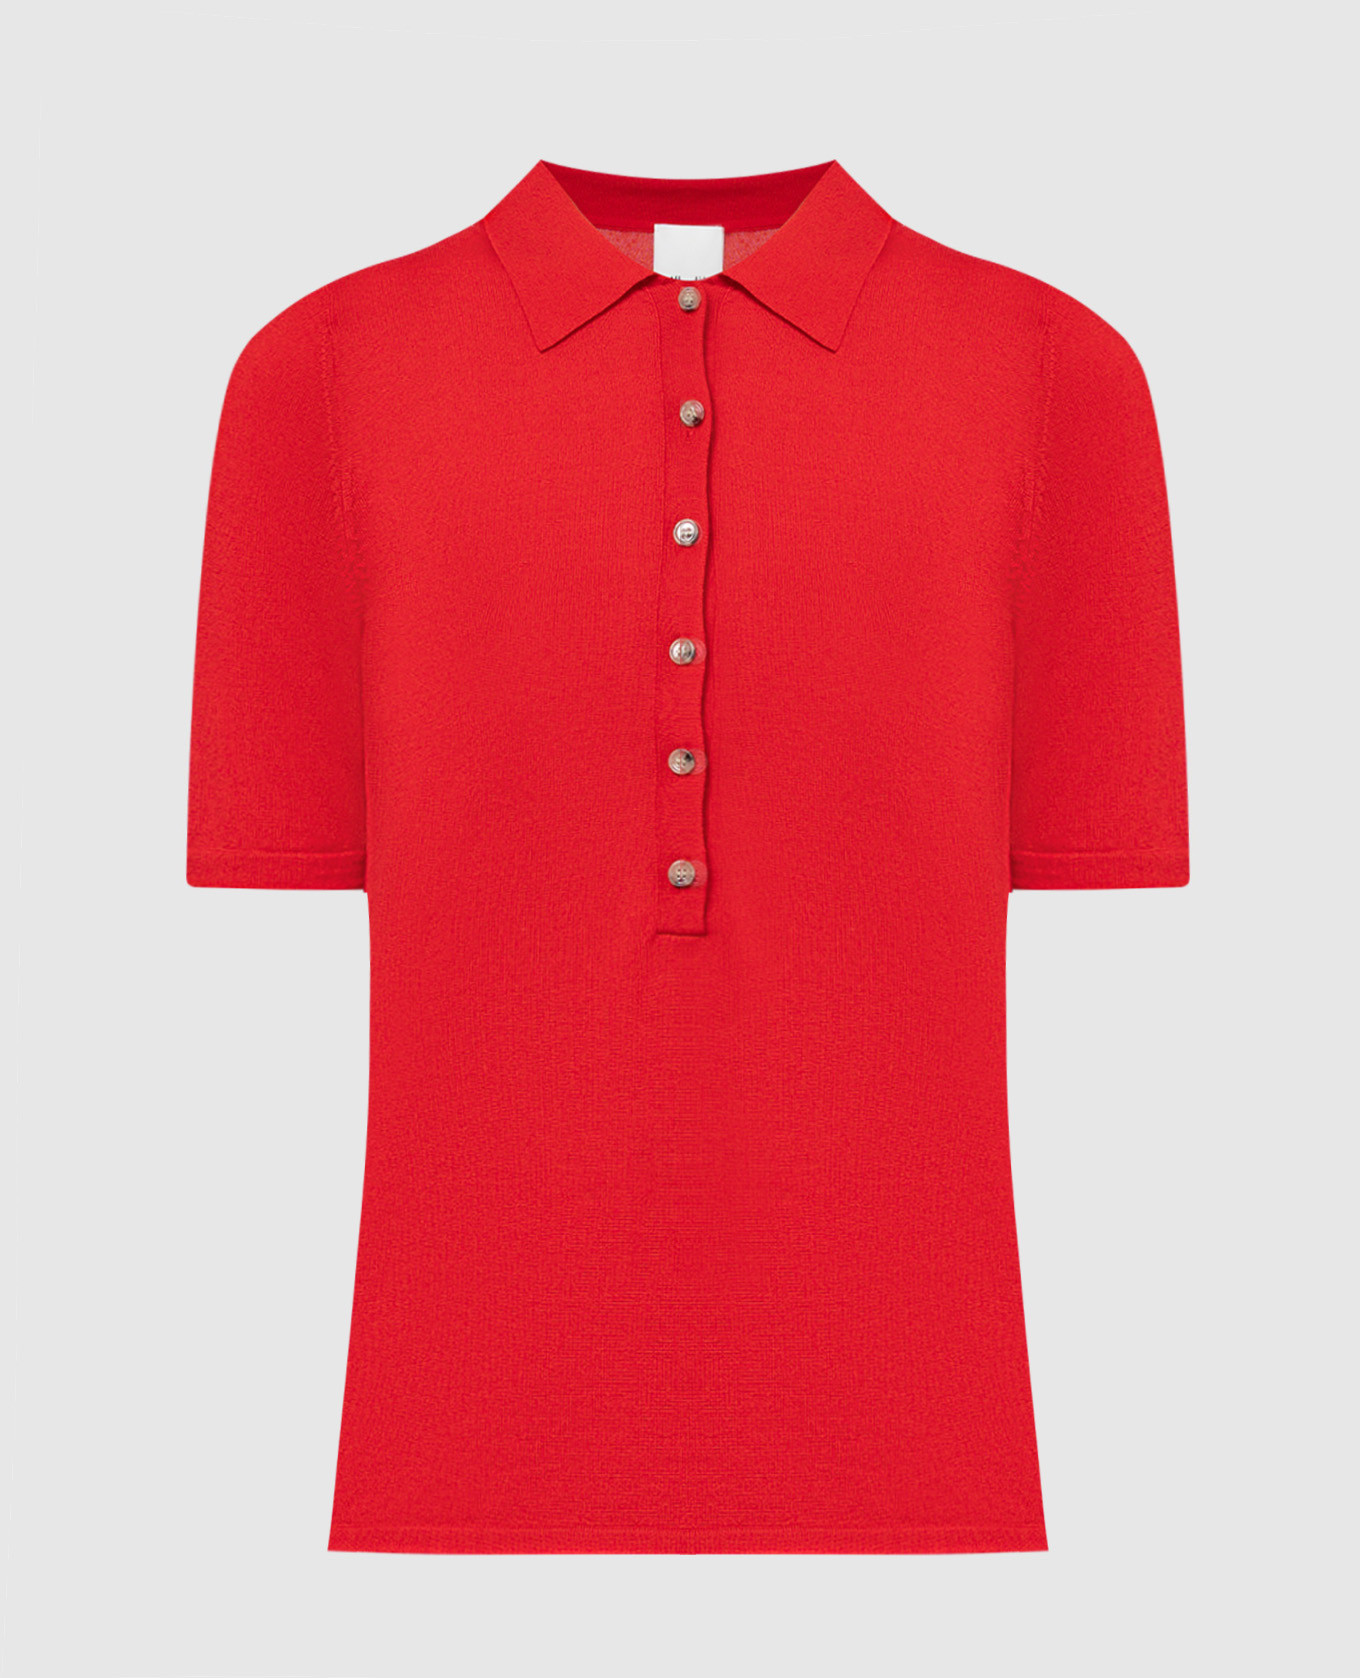 Red polo shirt made of wool